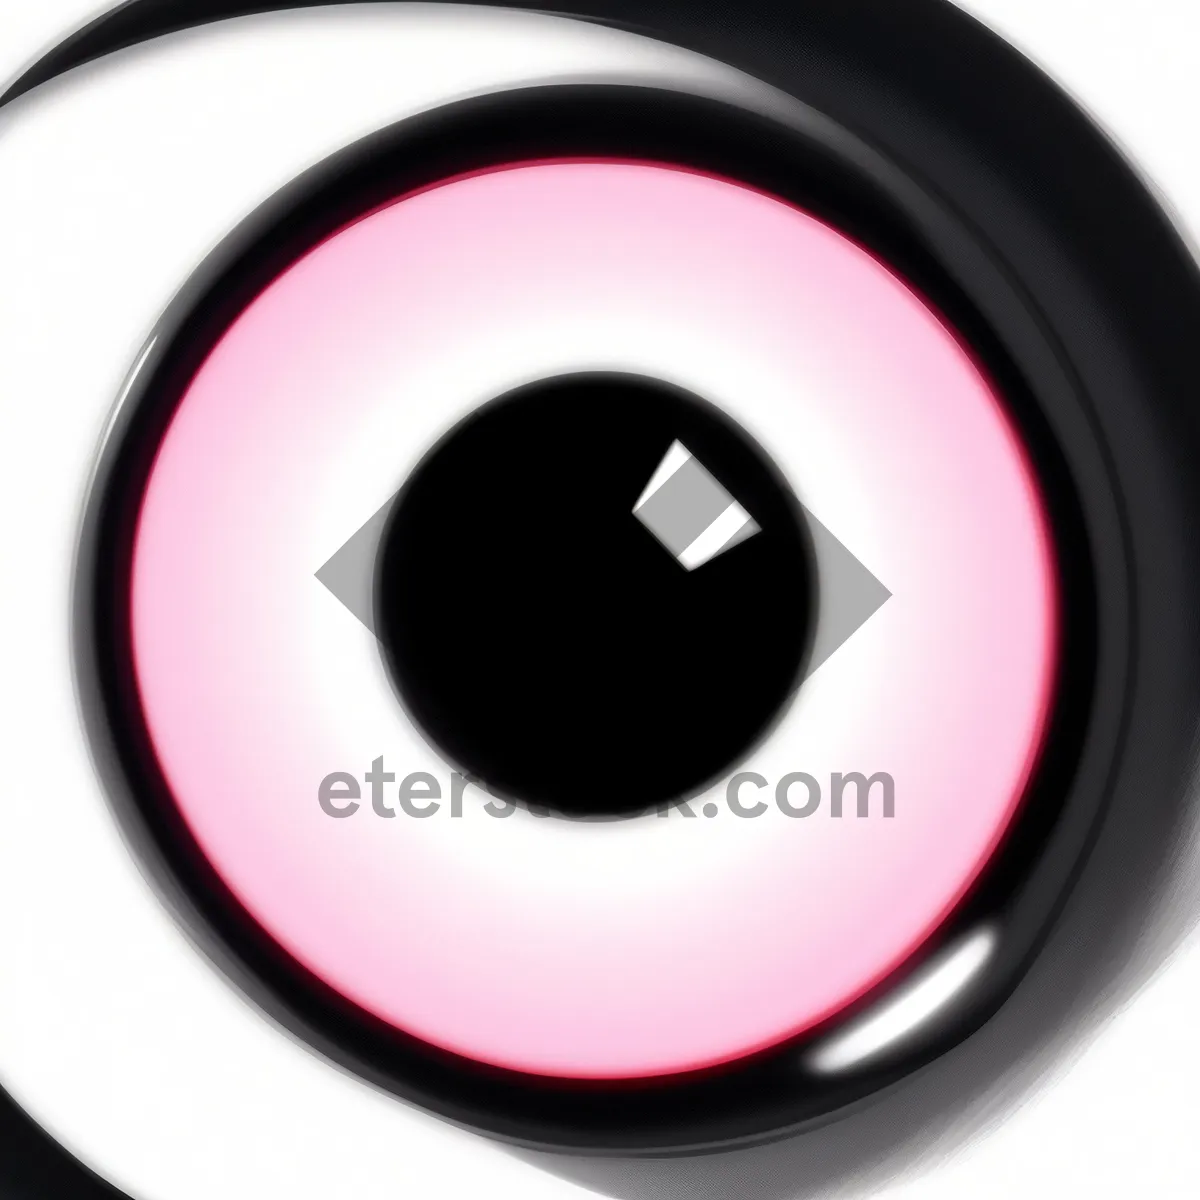 Picture of Shiny Round Web Buttons - Black Metallic Design